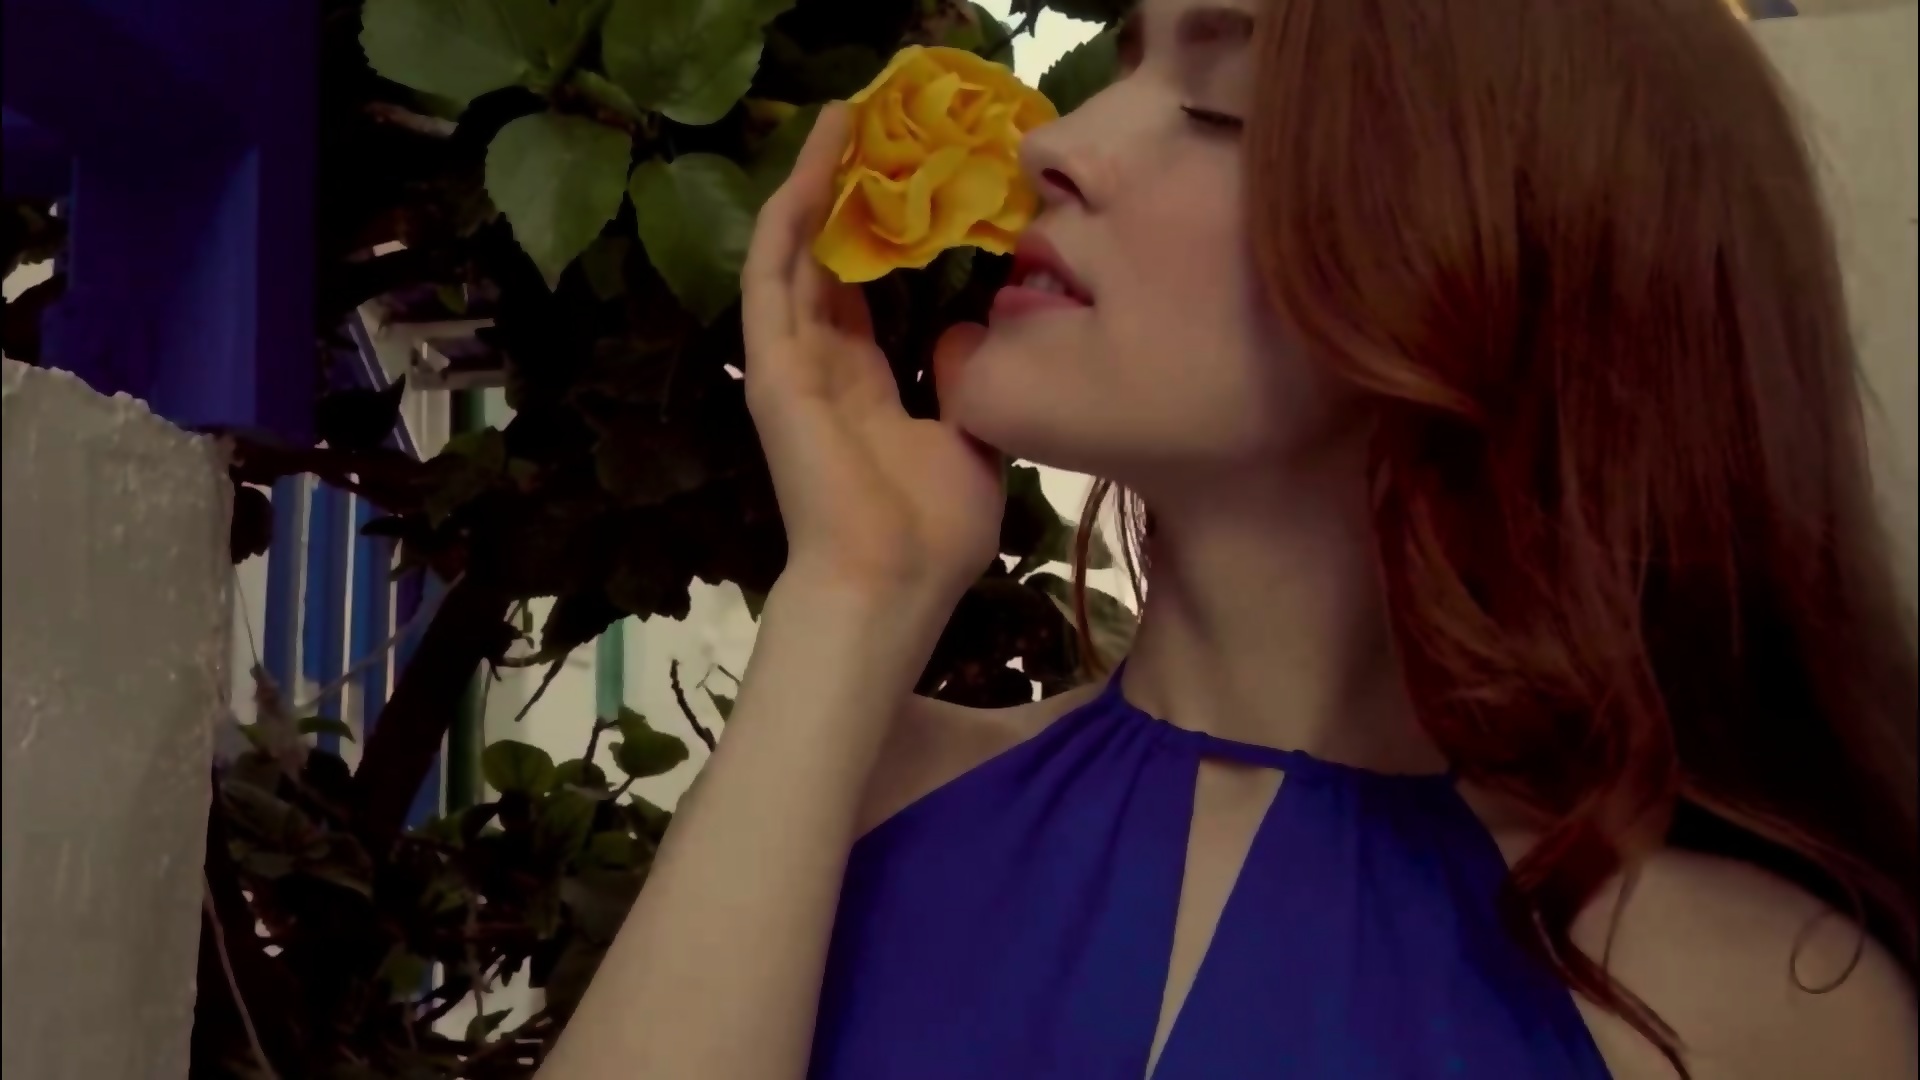 Vixen The Most Beautiful Red Head You Have Ever Seen Jia Lissa Eporner 